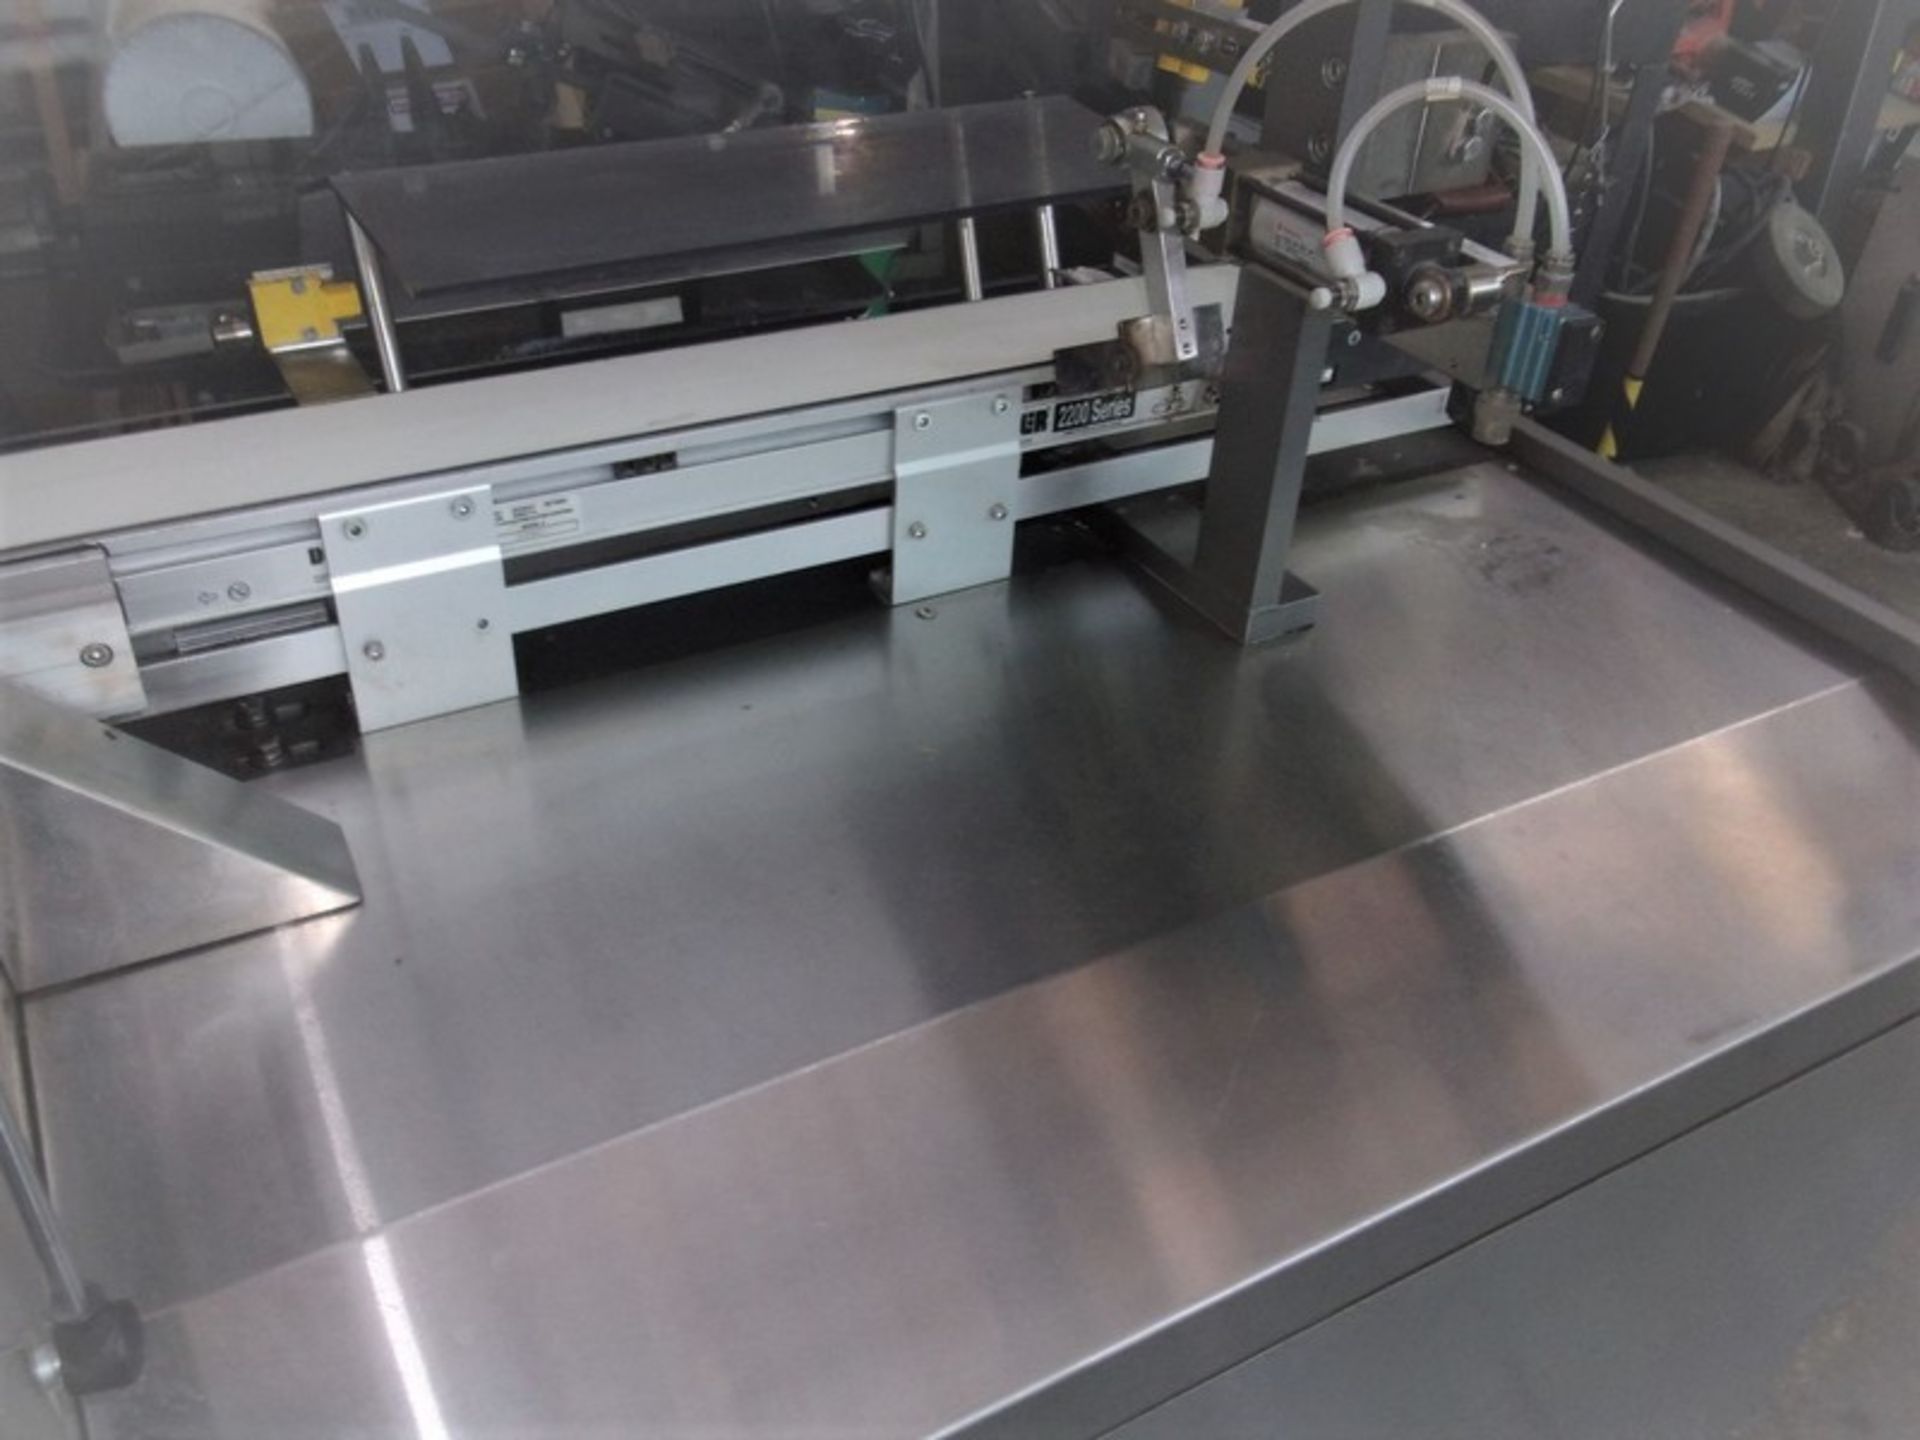 Dorner Inspection Conveyor, Series 2200, Aprox. 3- 1/2 Inches Wide X 36 Inches Long with Markem 9840 - Image 9 of 13